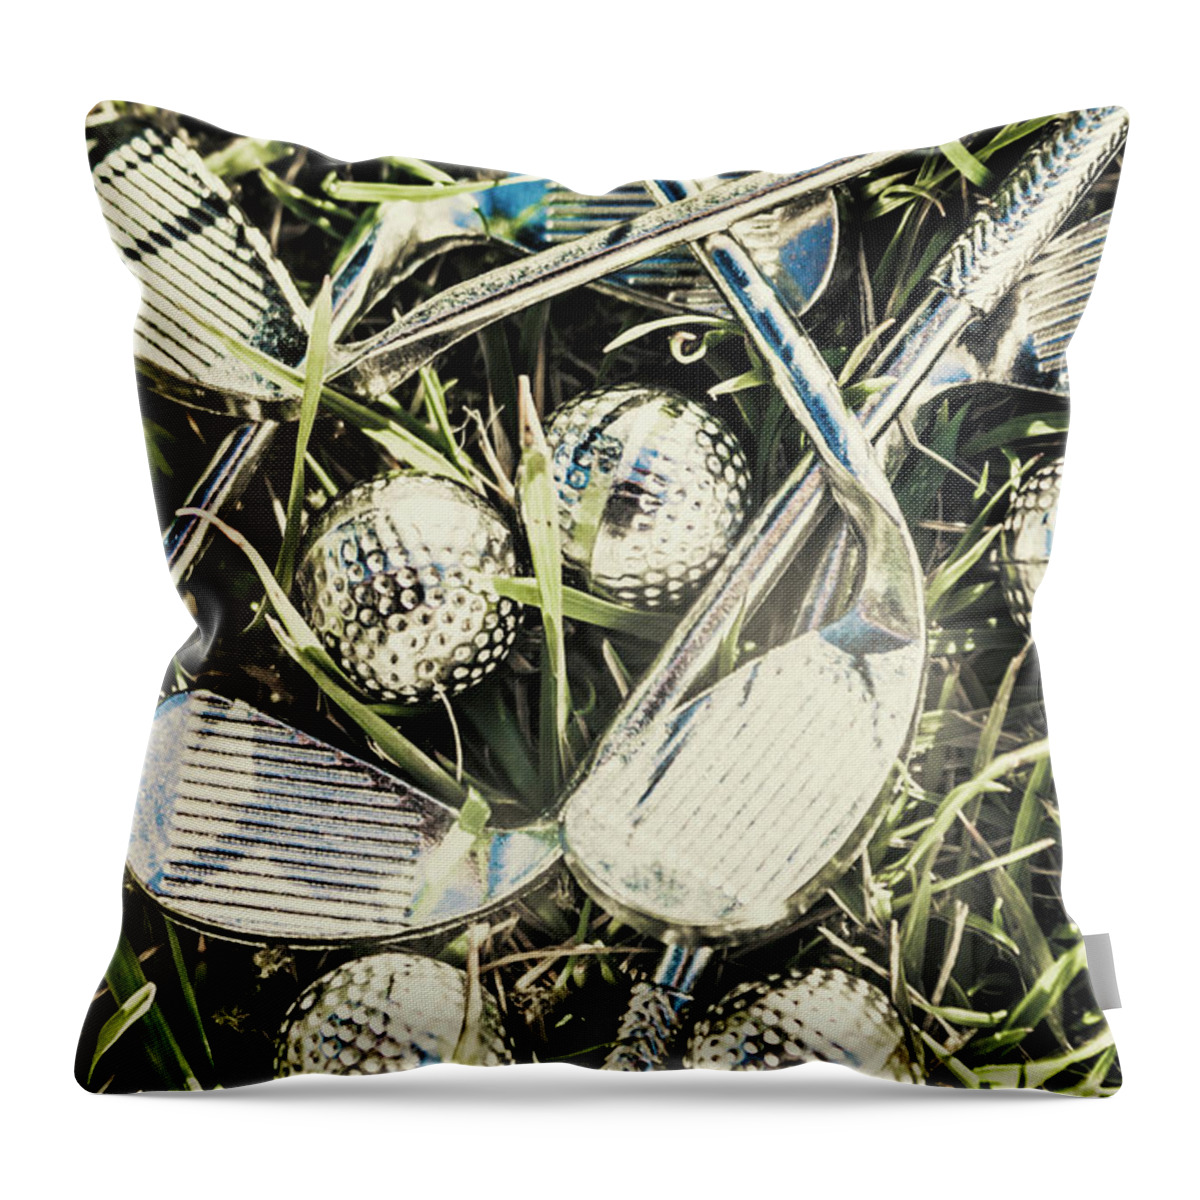 Golfclub Throw Pillow featuring the photograph Golf chrome by Jorgo Photography